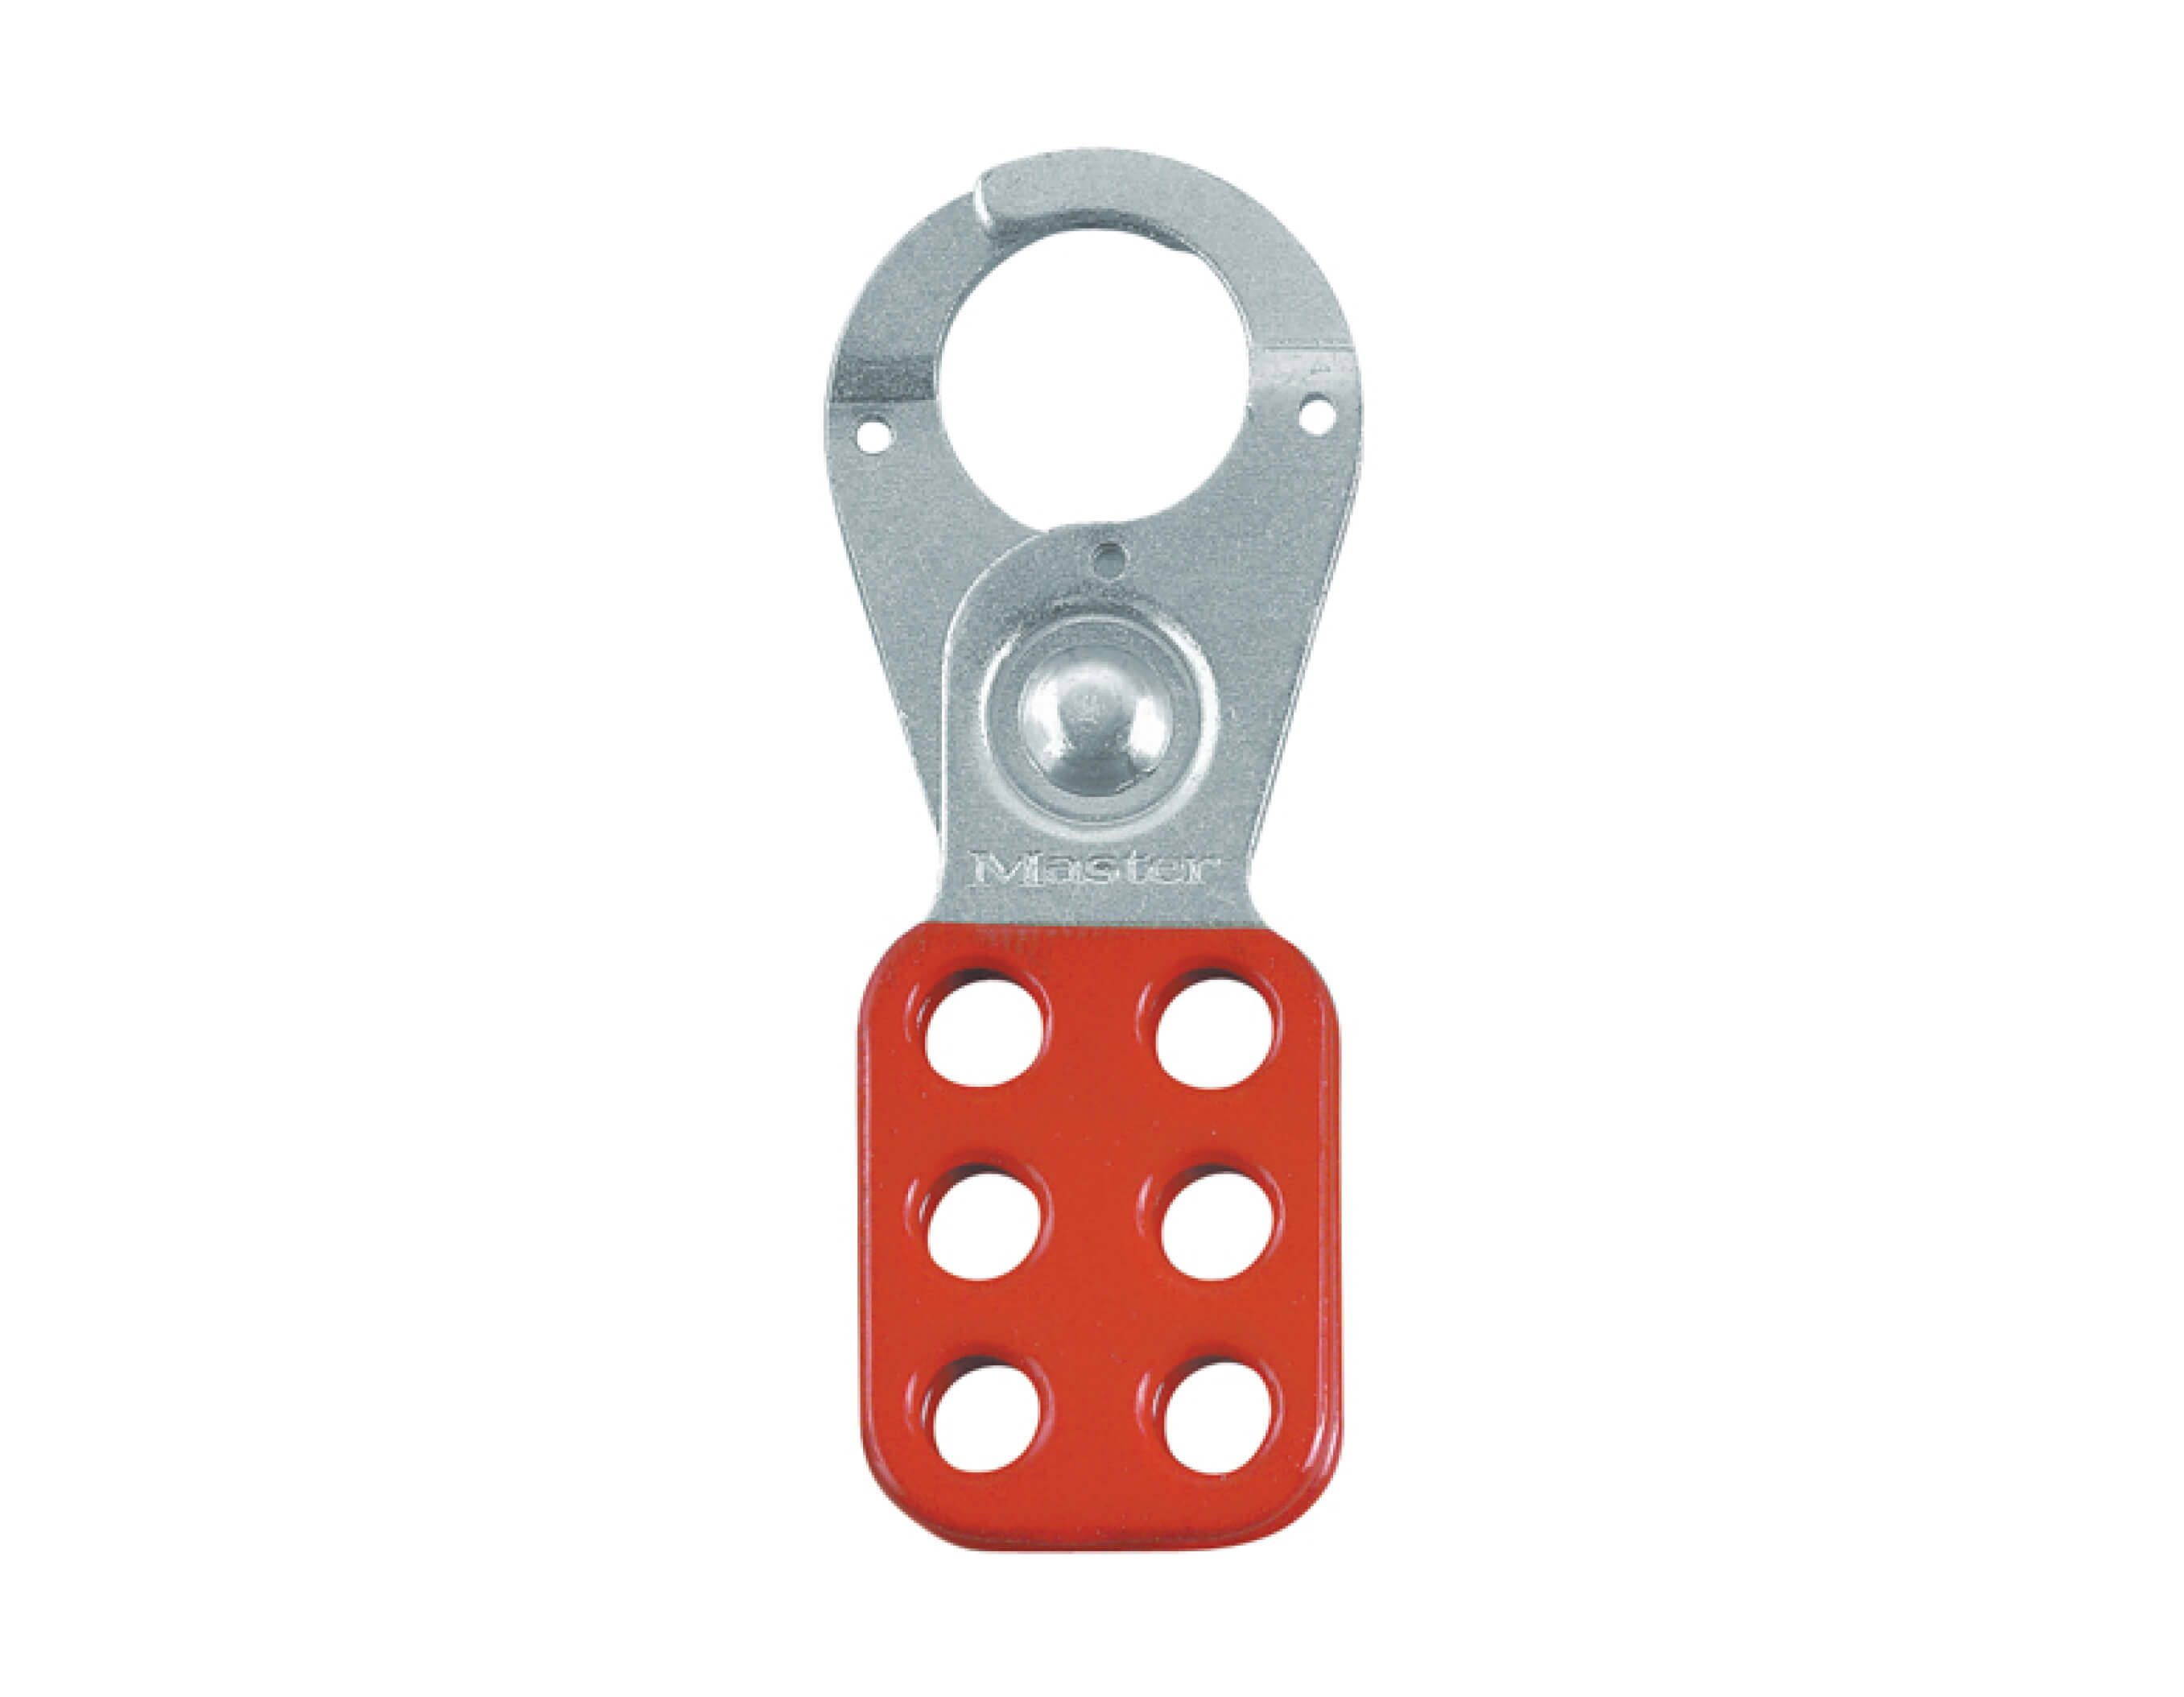 STEEL LOCKOUT HASP 1” (25MM) JAW CLEARANCE